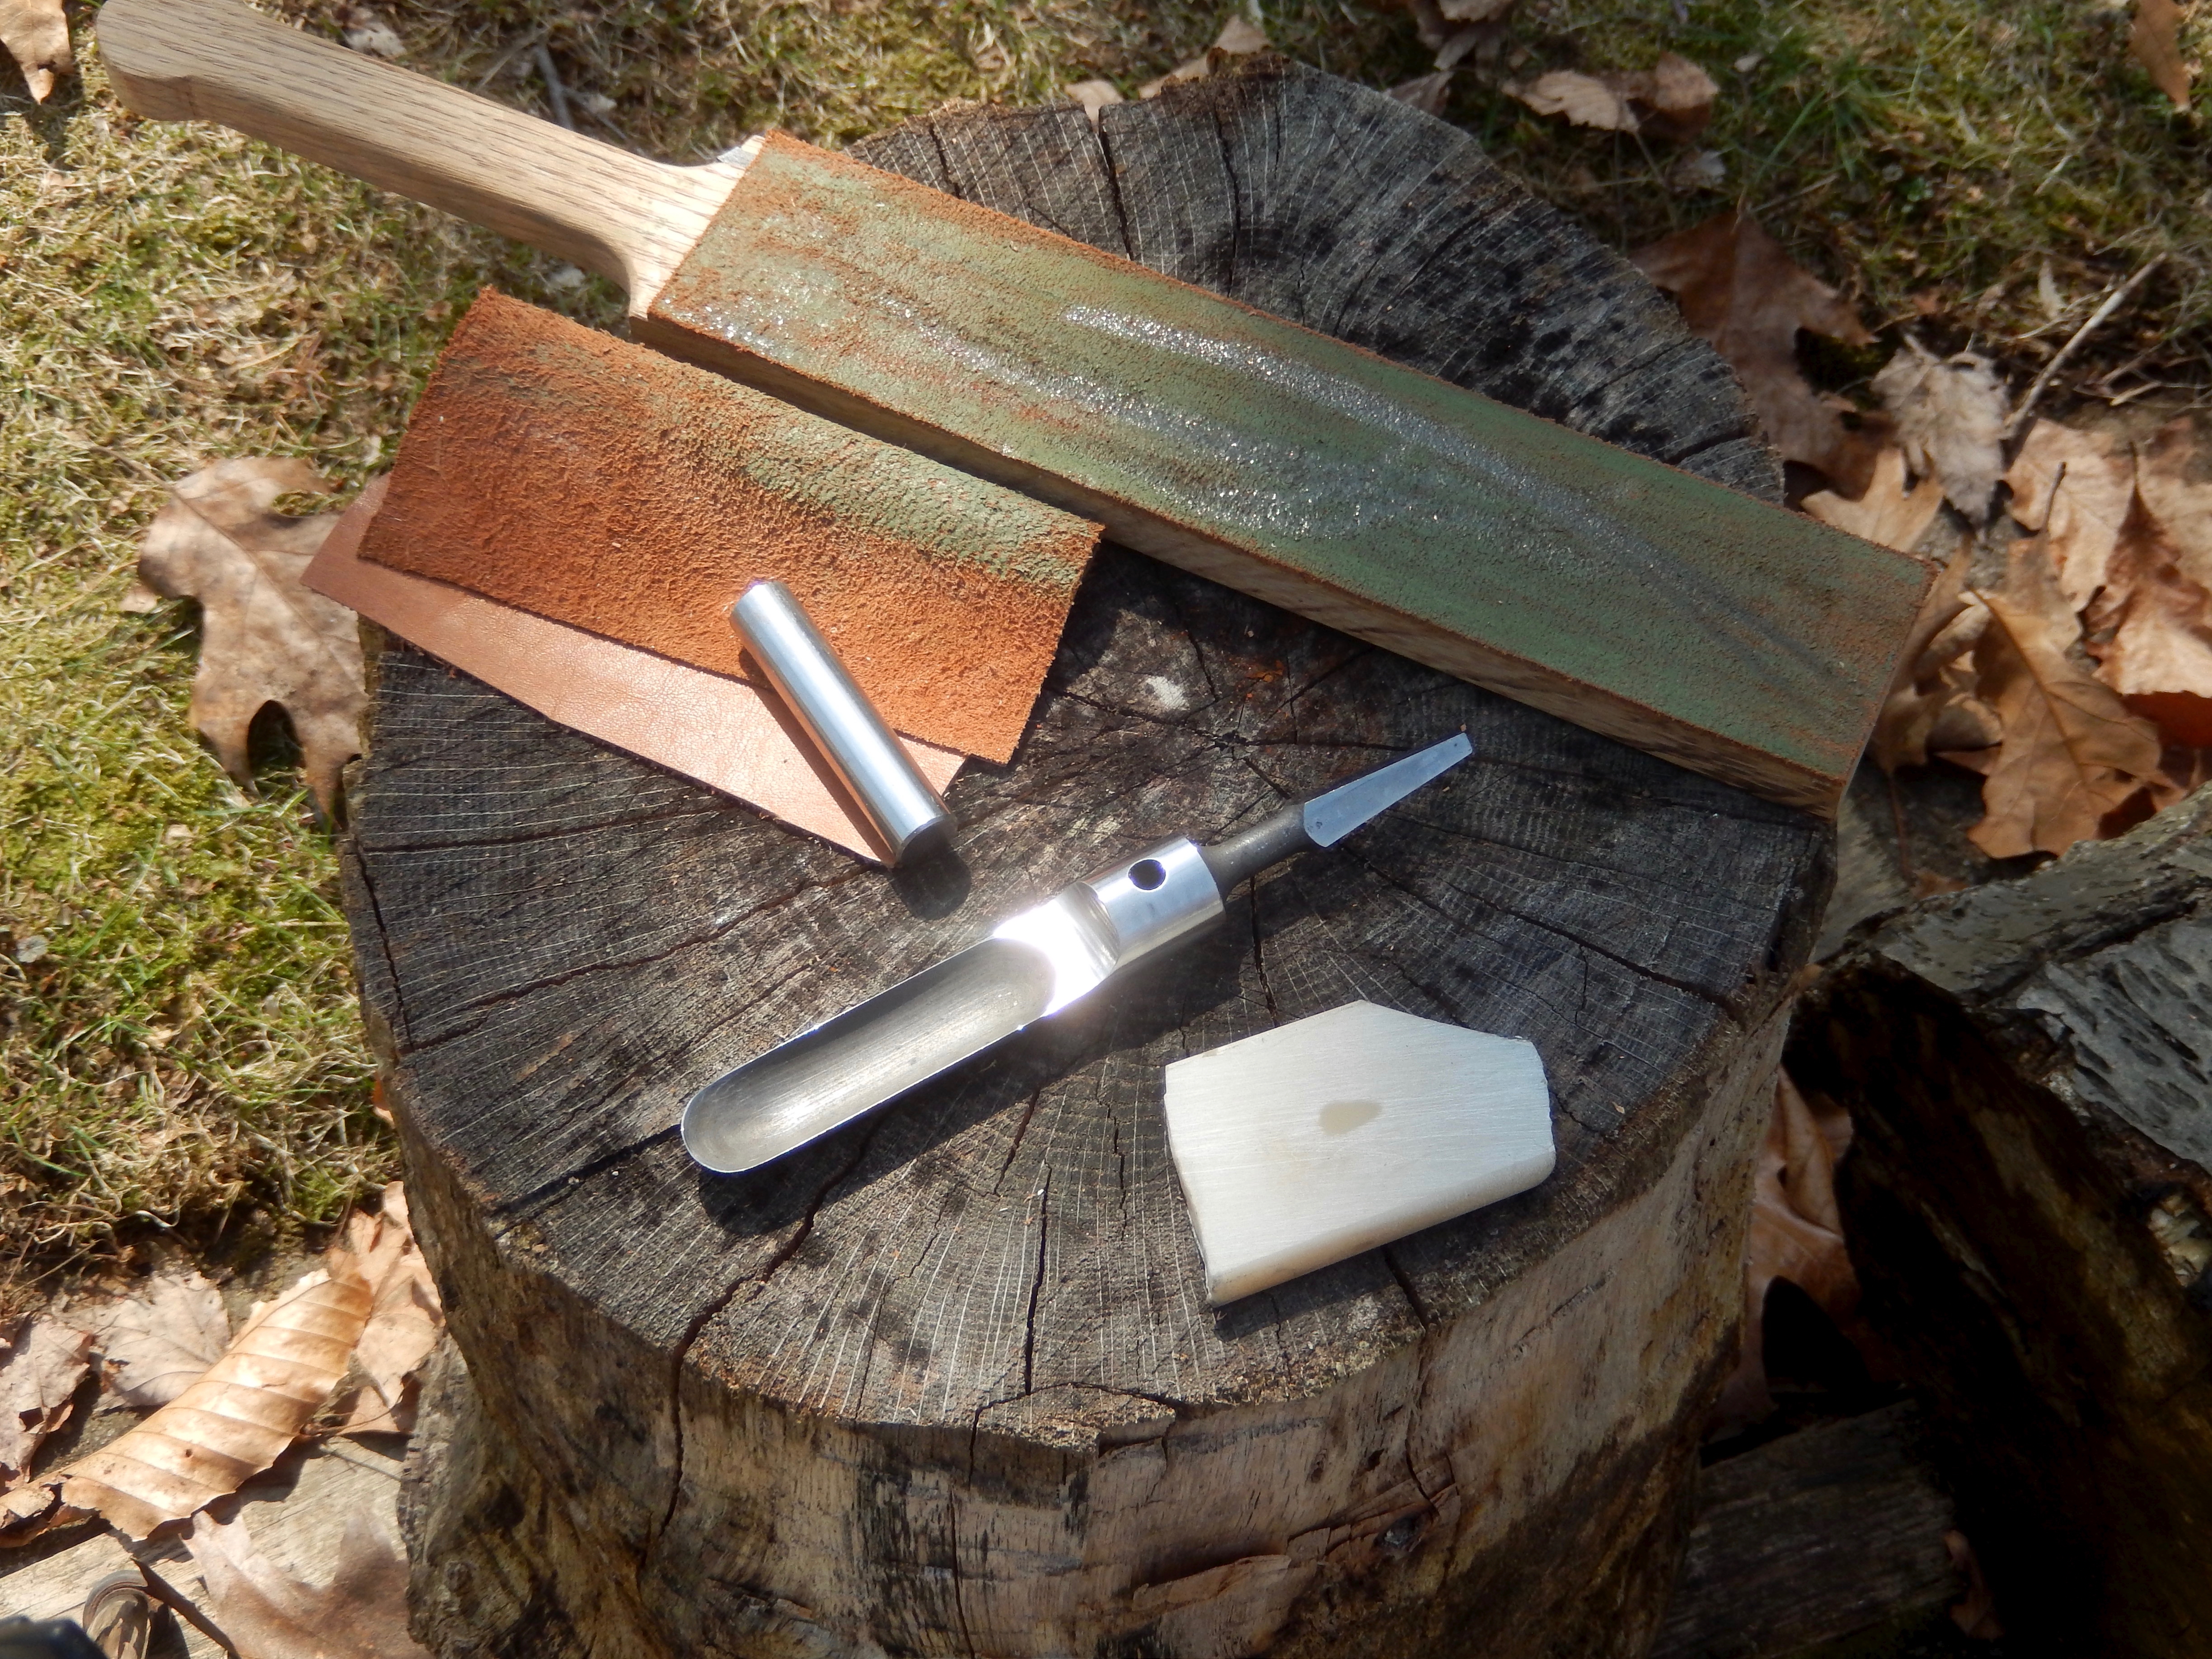 Sharpening spoon-carving tools with wet/dry sandpaper